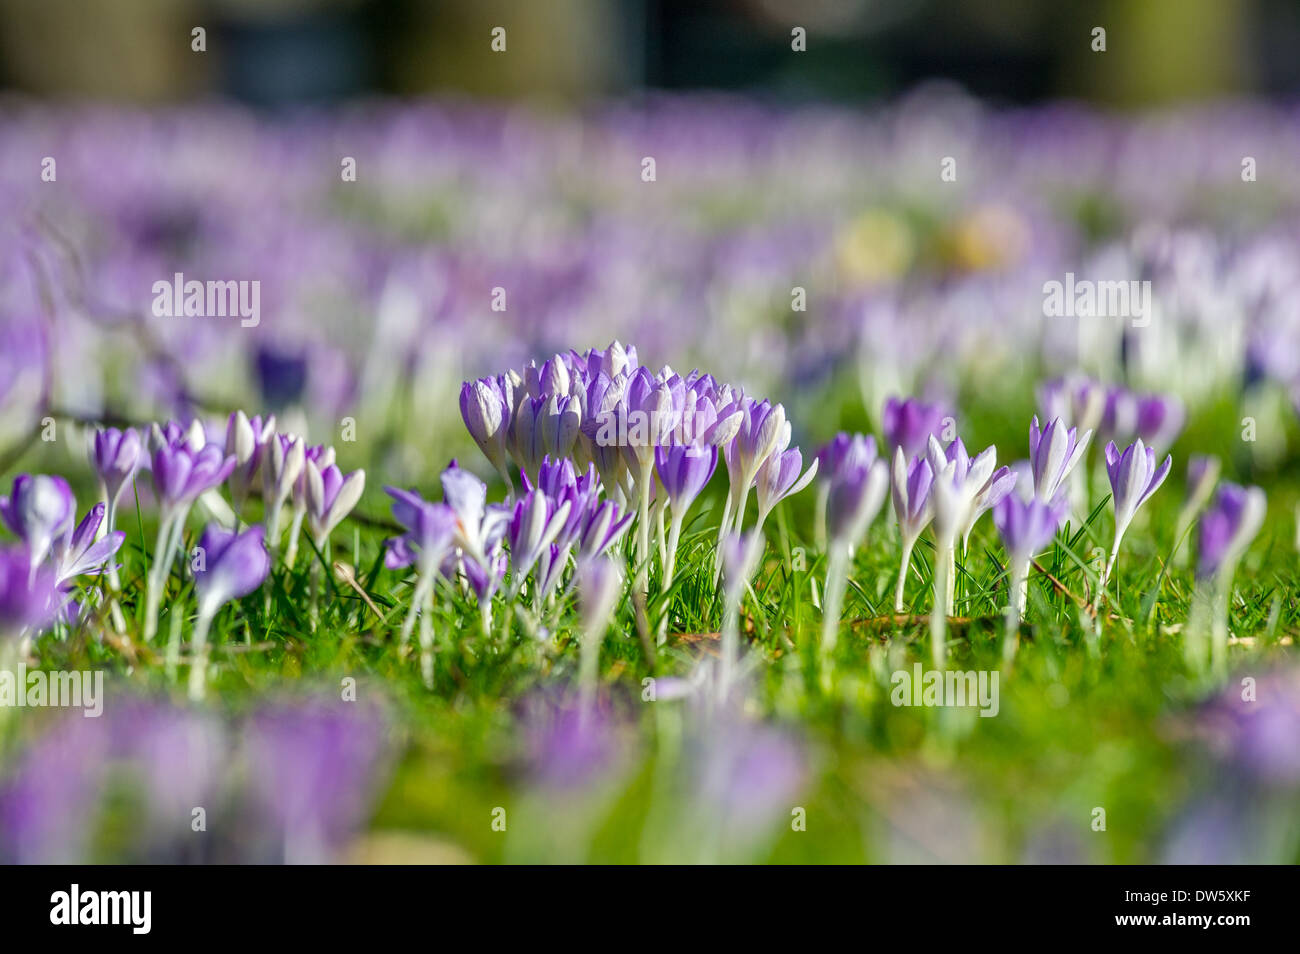 The small blue and purple flower of the Crocus Stock Photo